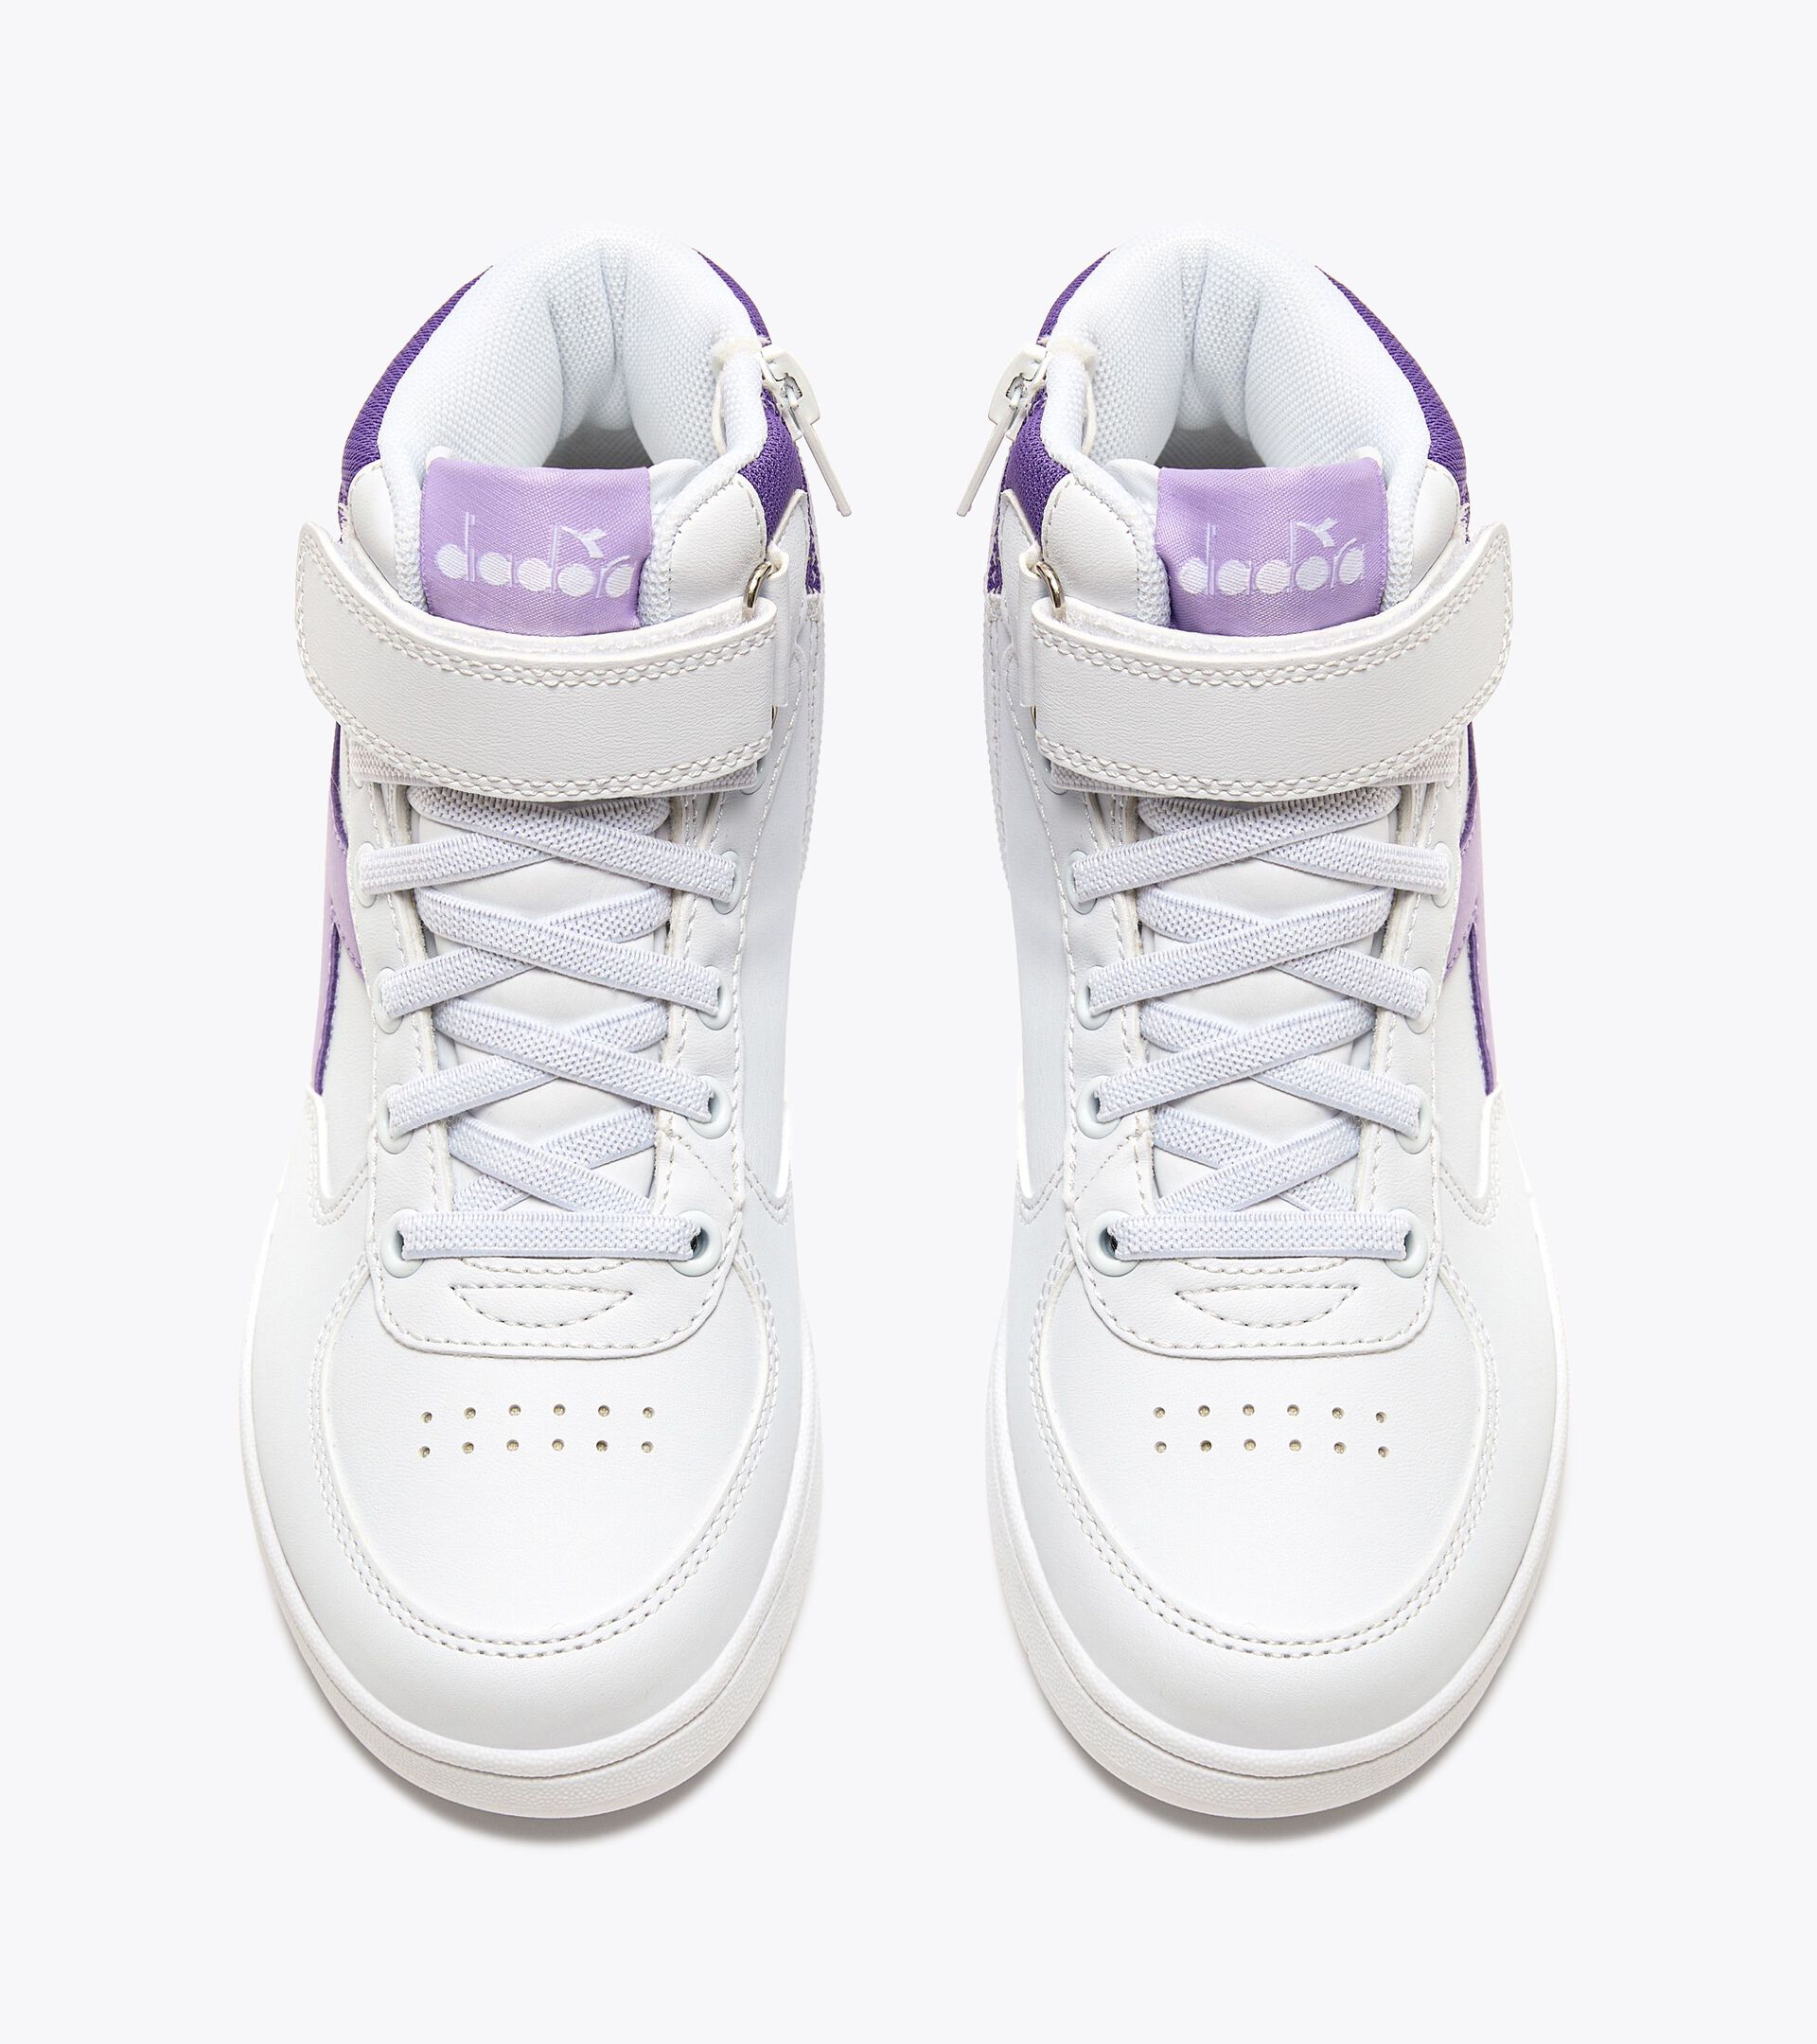 Sports shoes - Kids 4-8 years RAPTOR MID PS WHT/PURPLE ROSE/PASSION FLOWER - Diadora